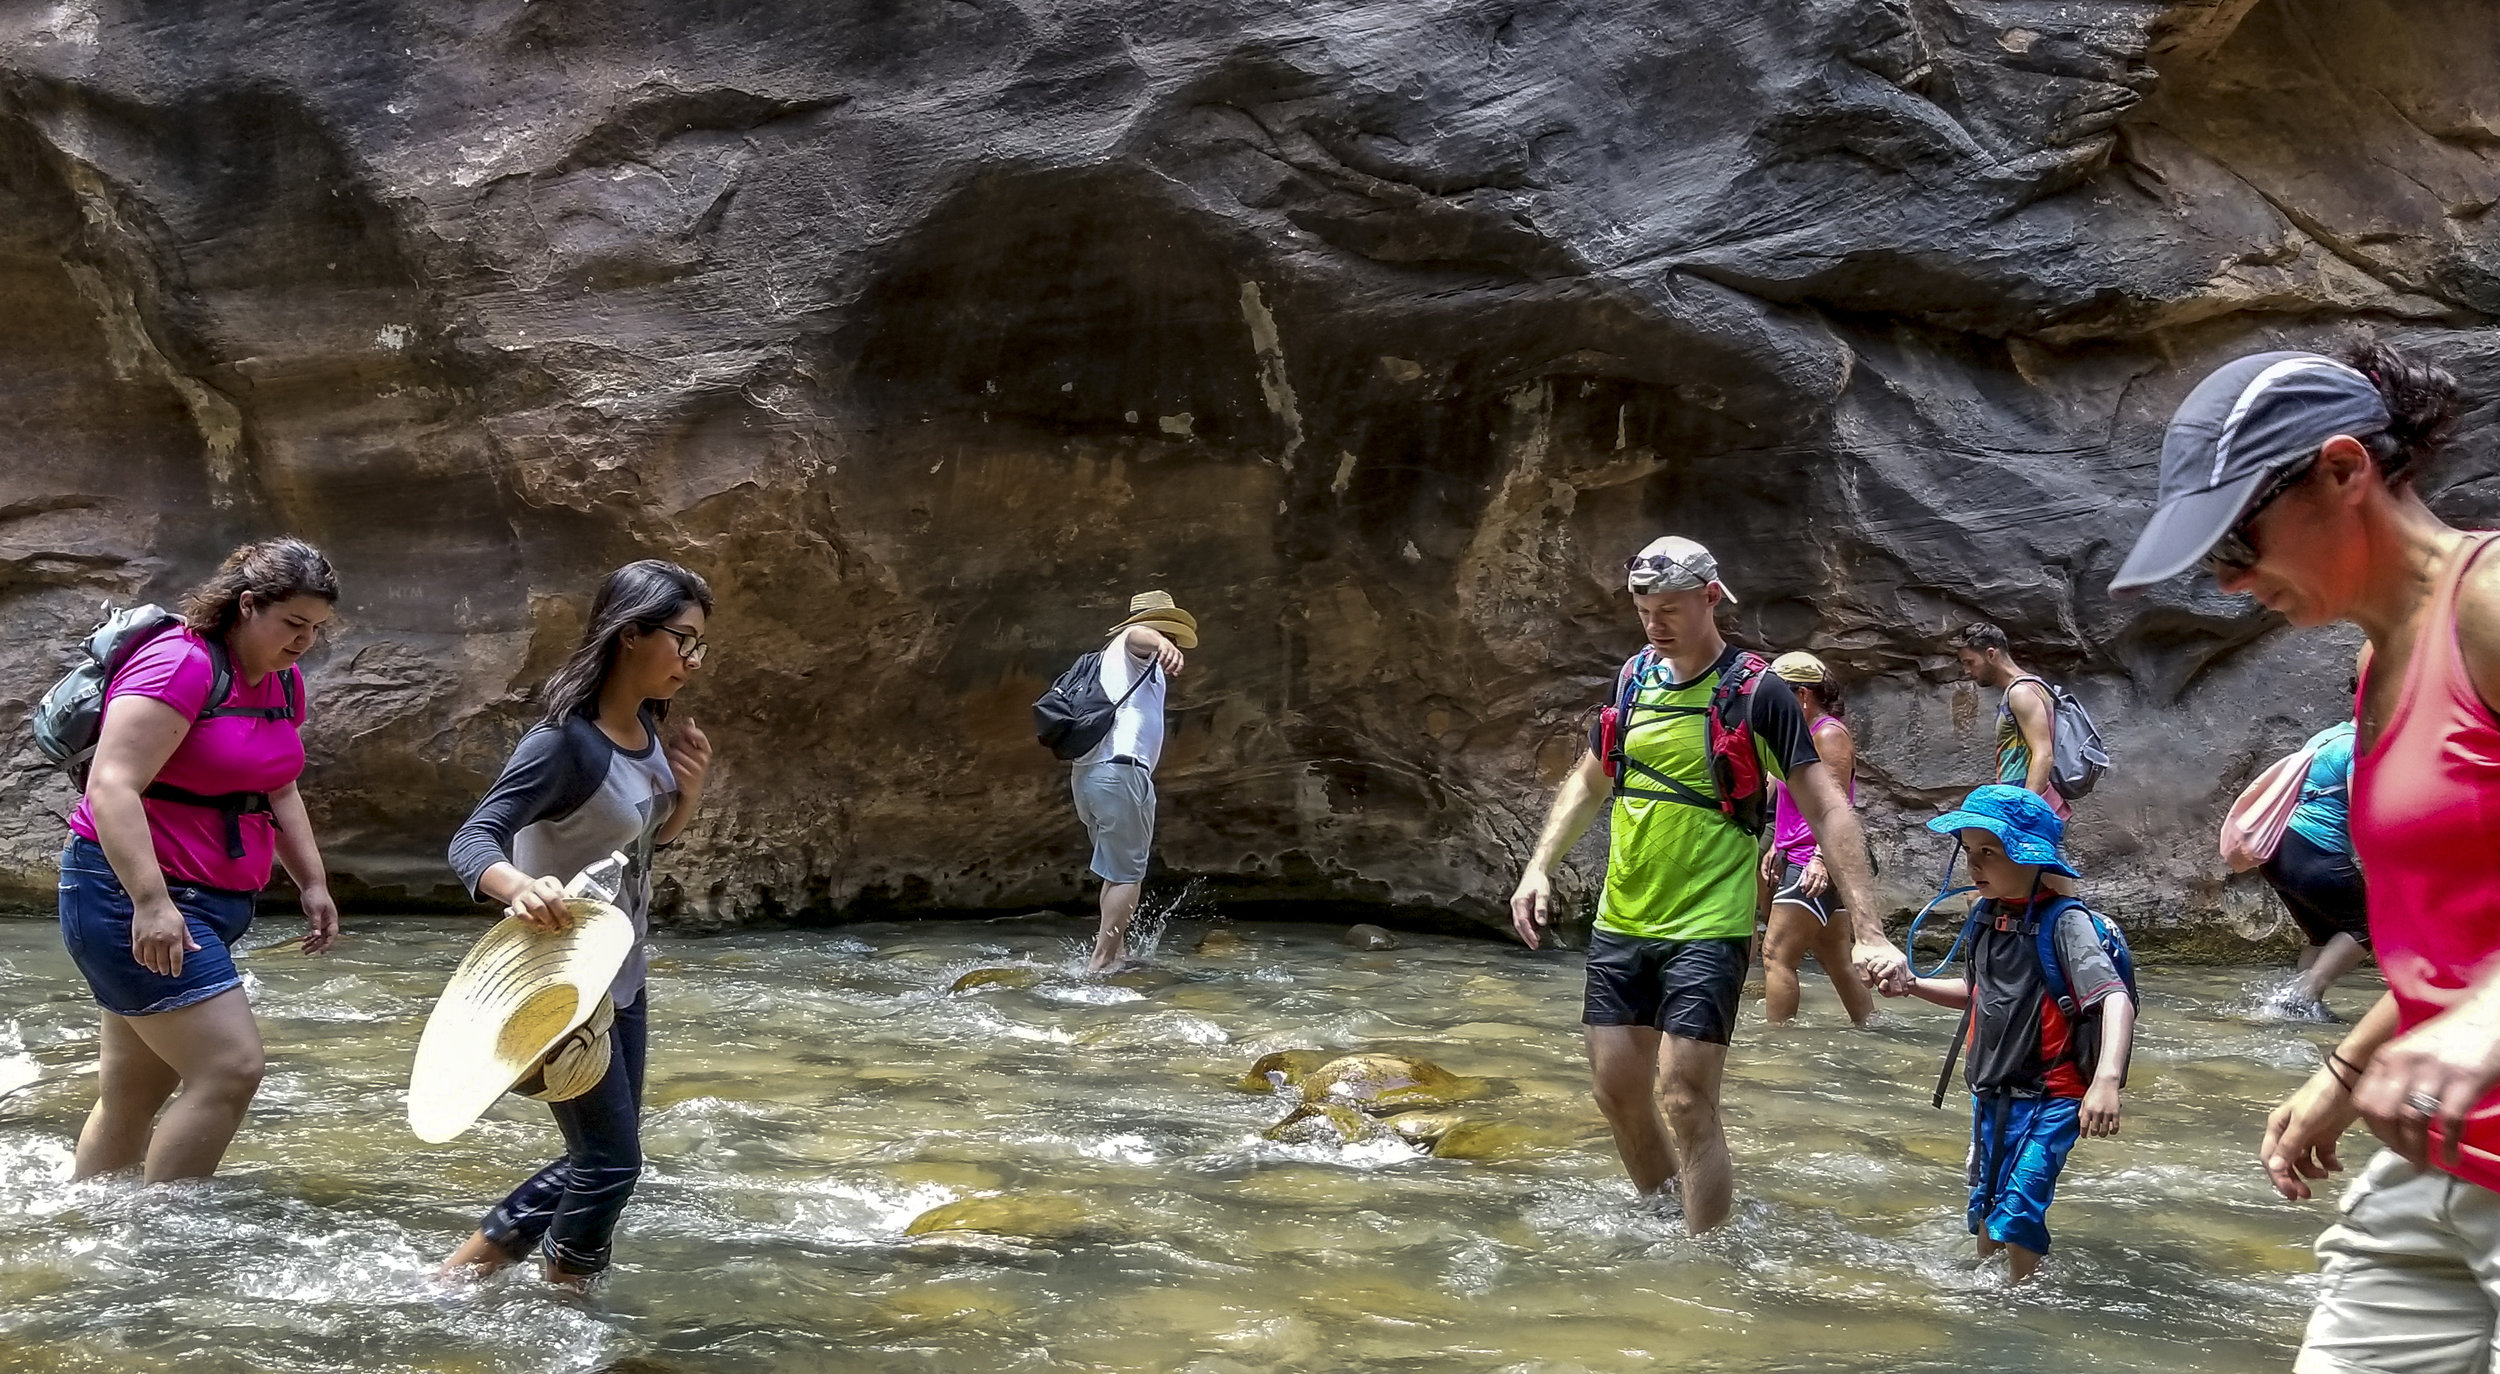  Zion National Park visitors walk along The Narrows, a river hike through the Virgin River, at Zion National Park in Utah on Friday, July 14, 2017.  Patrick Connolly Las Vegas Review-Journal @PConnPie 